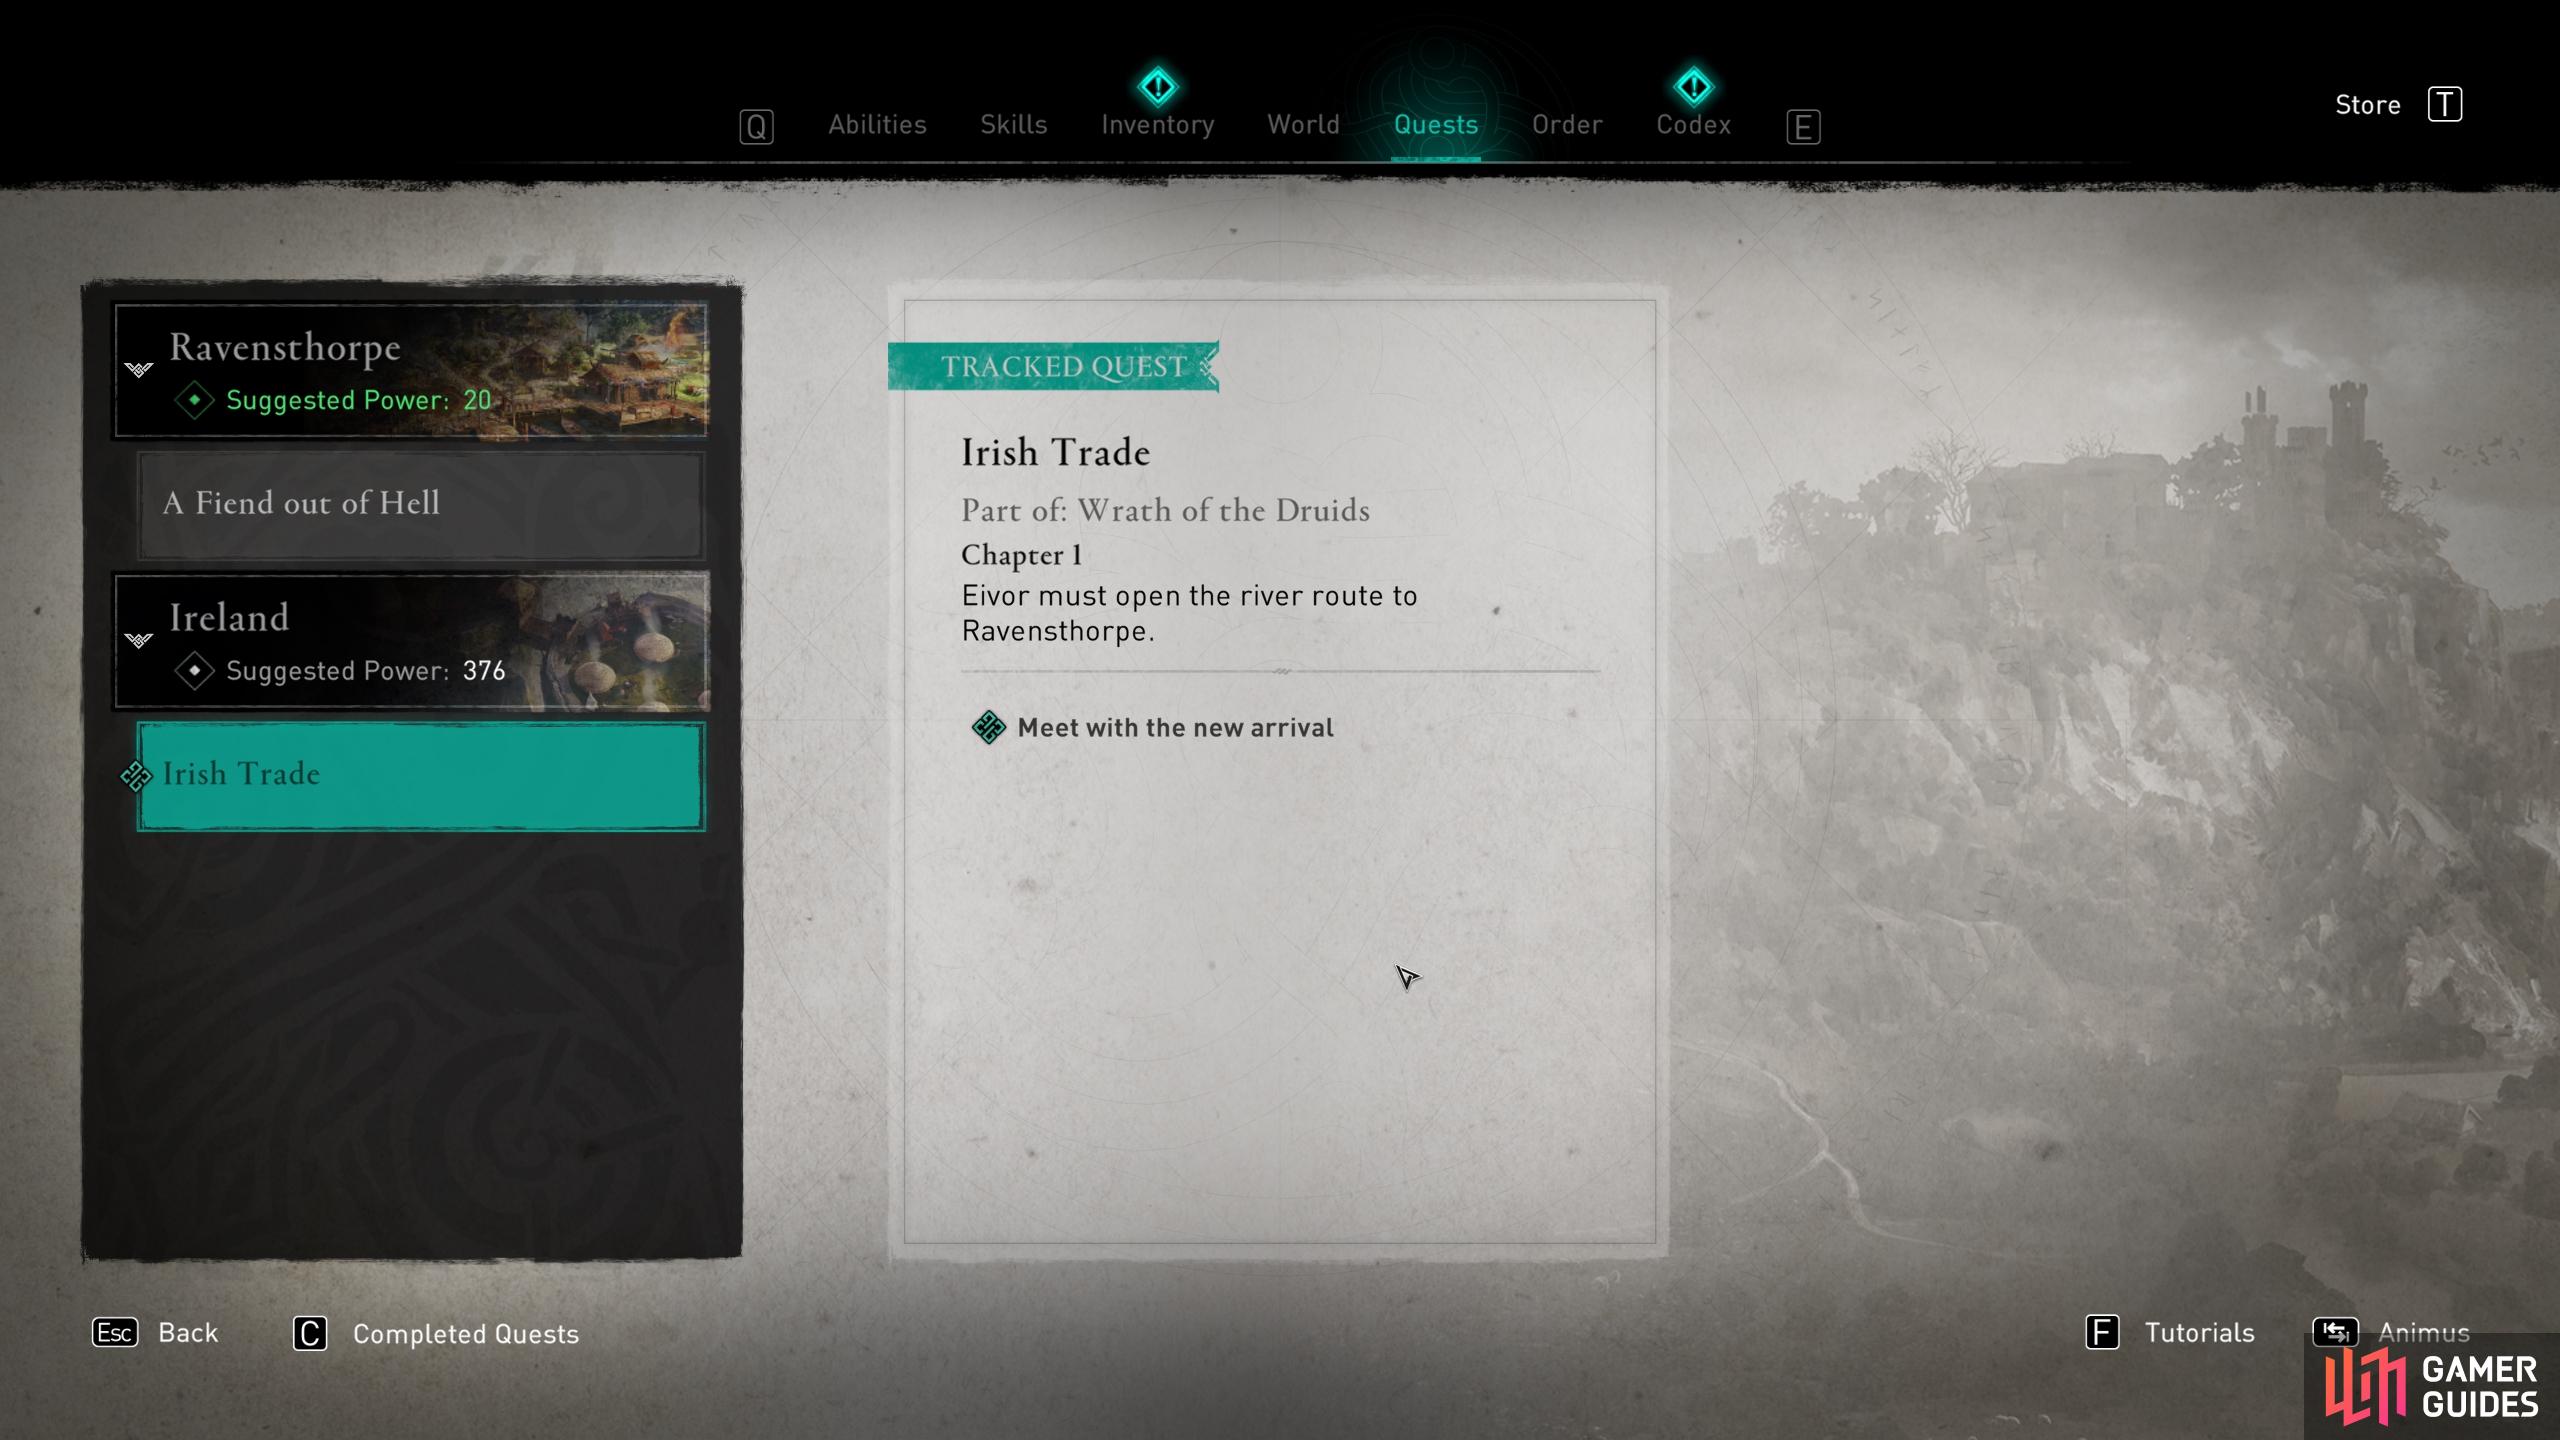 Once you have the DLC, youll find the Irish Trade quest available in your quest log.